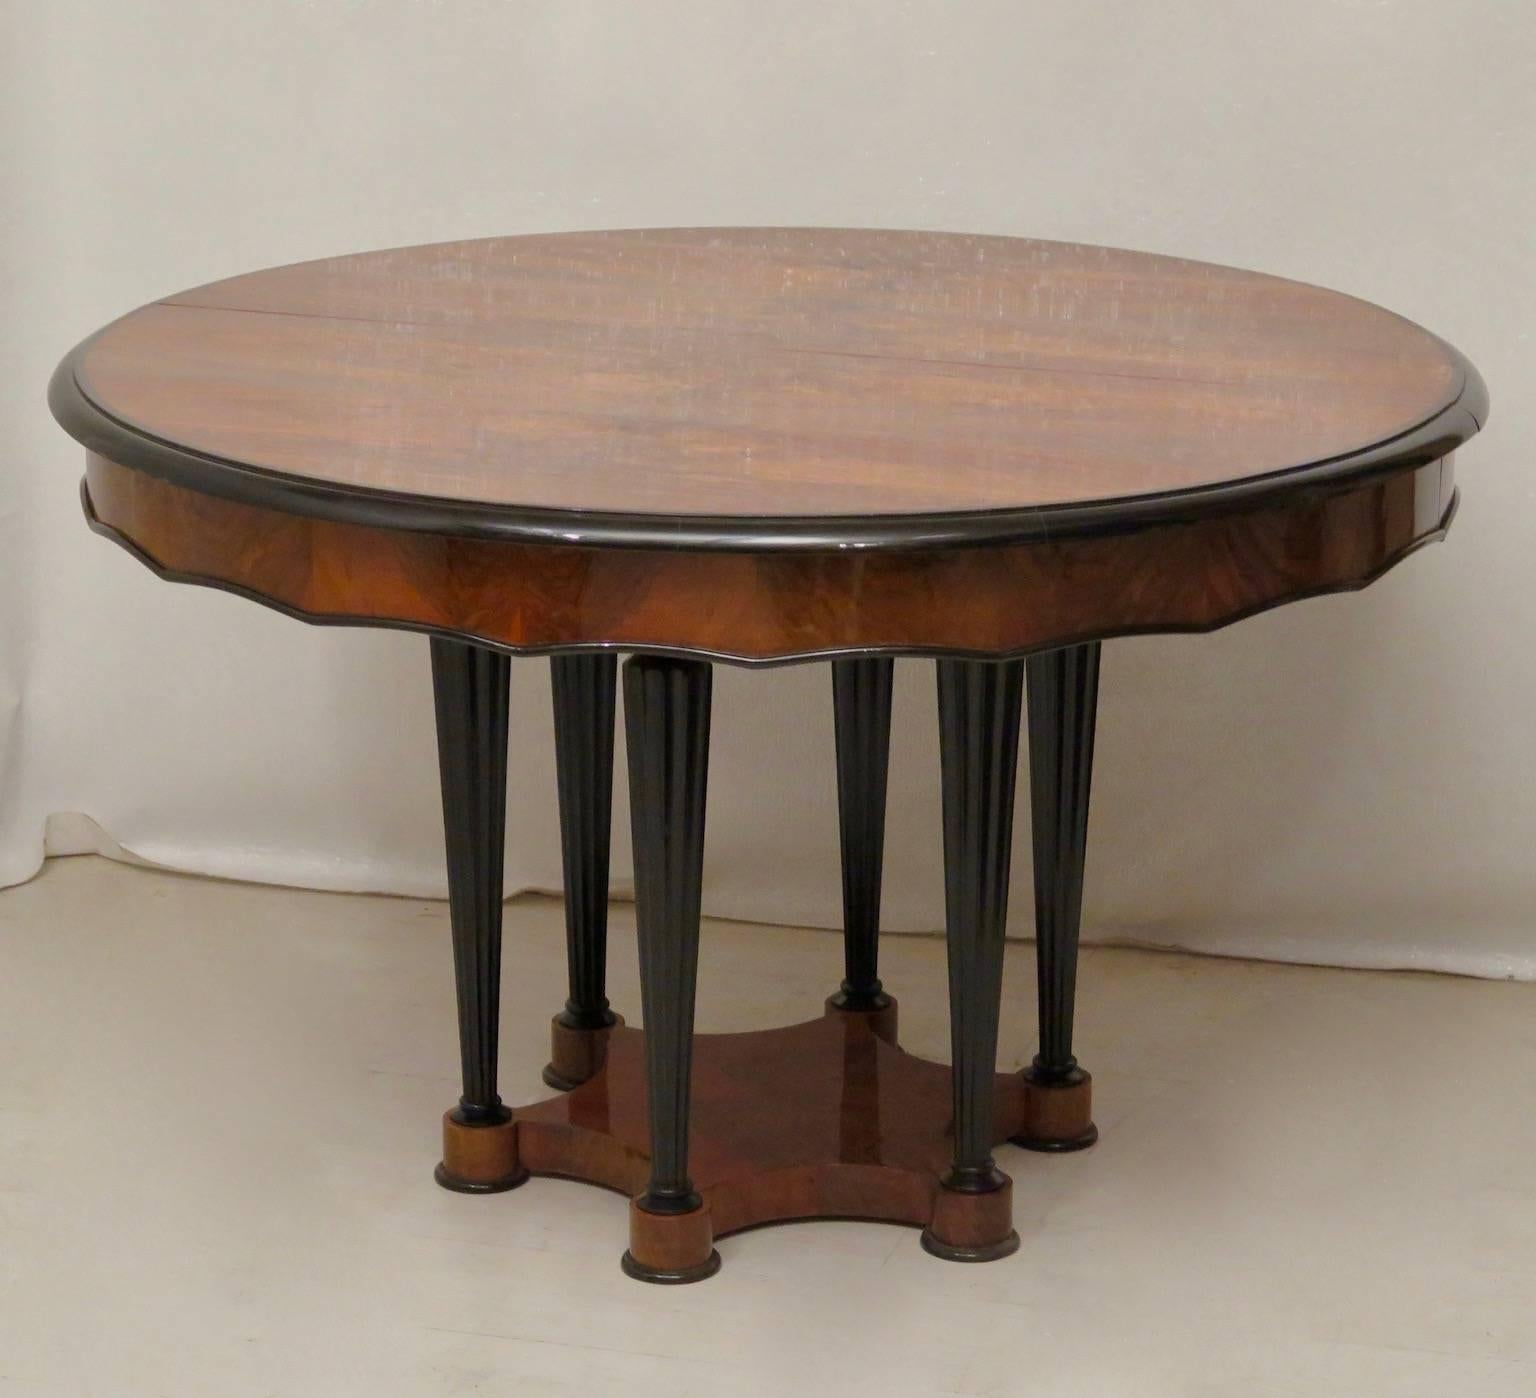 An important Biedermeier table, with a big round top and a very particular leg. The tabletop is veneered with a beautiful walnut with parts forming linear segments. The central leg is formed by many small black lacquered legs. The open table has two